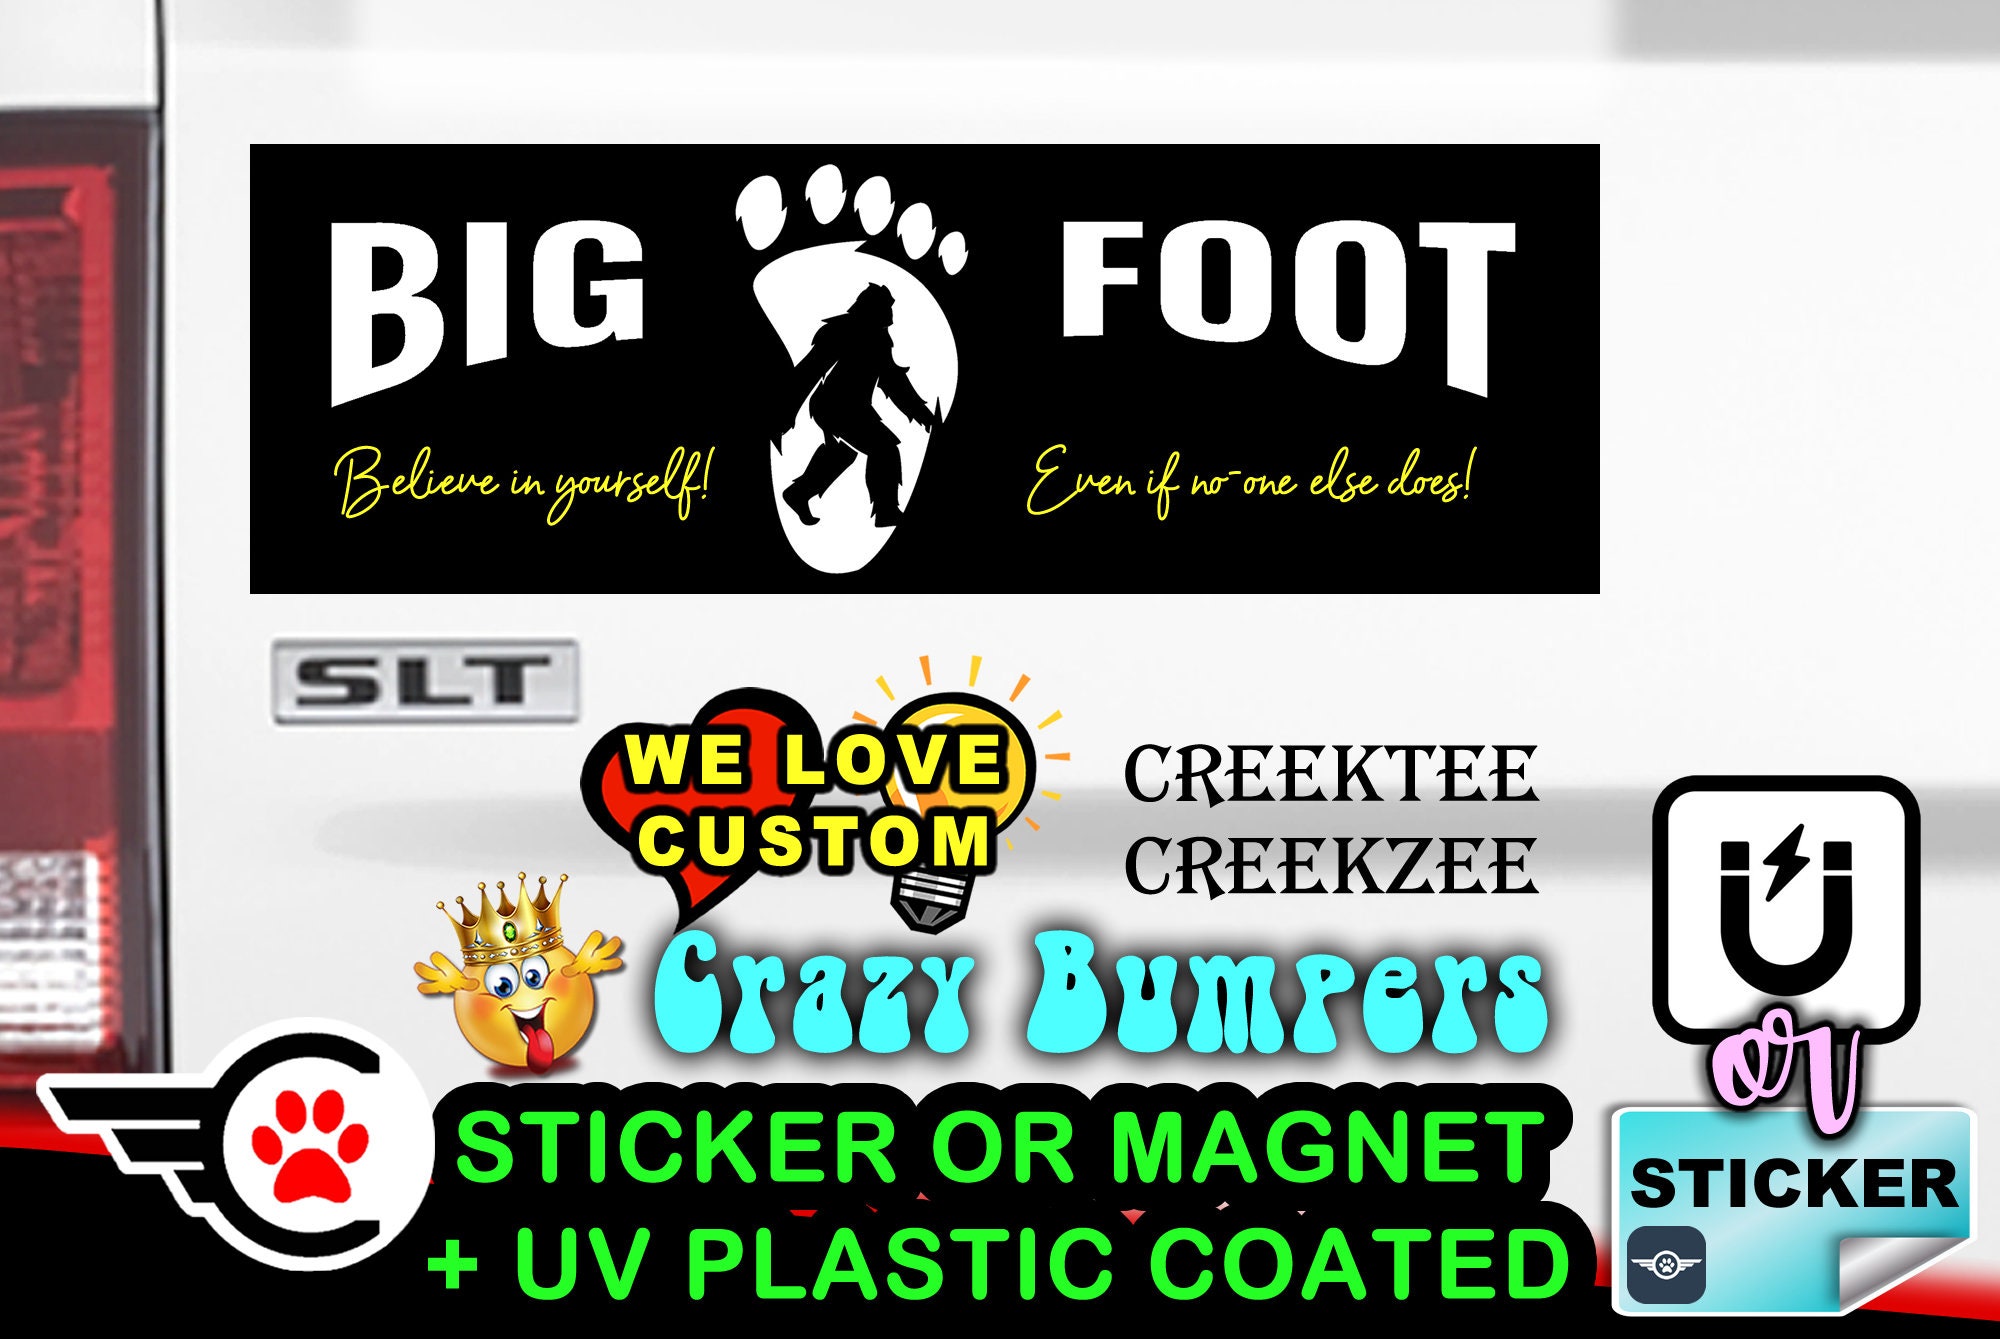 Bigfoot in yourself even if no-one else does  - Funny Bumper Sticker or Magnet 9